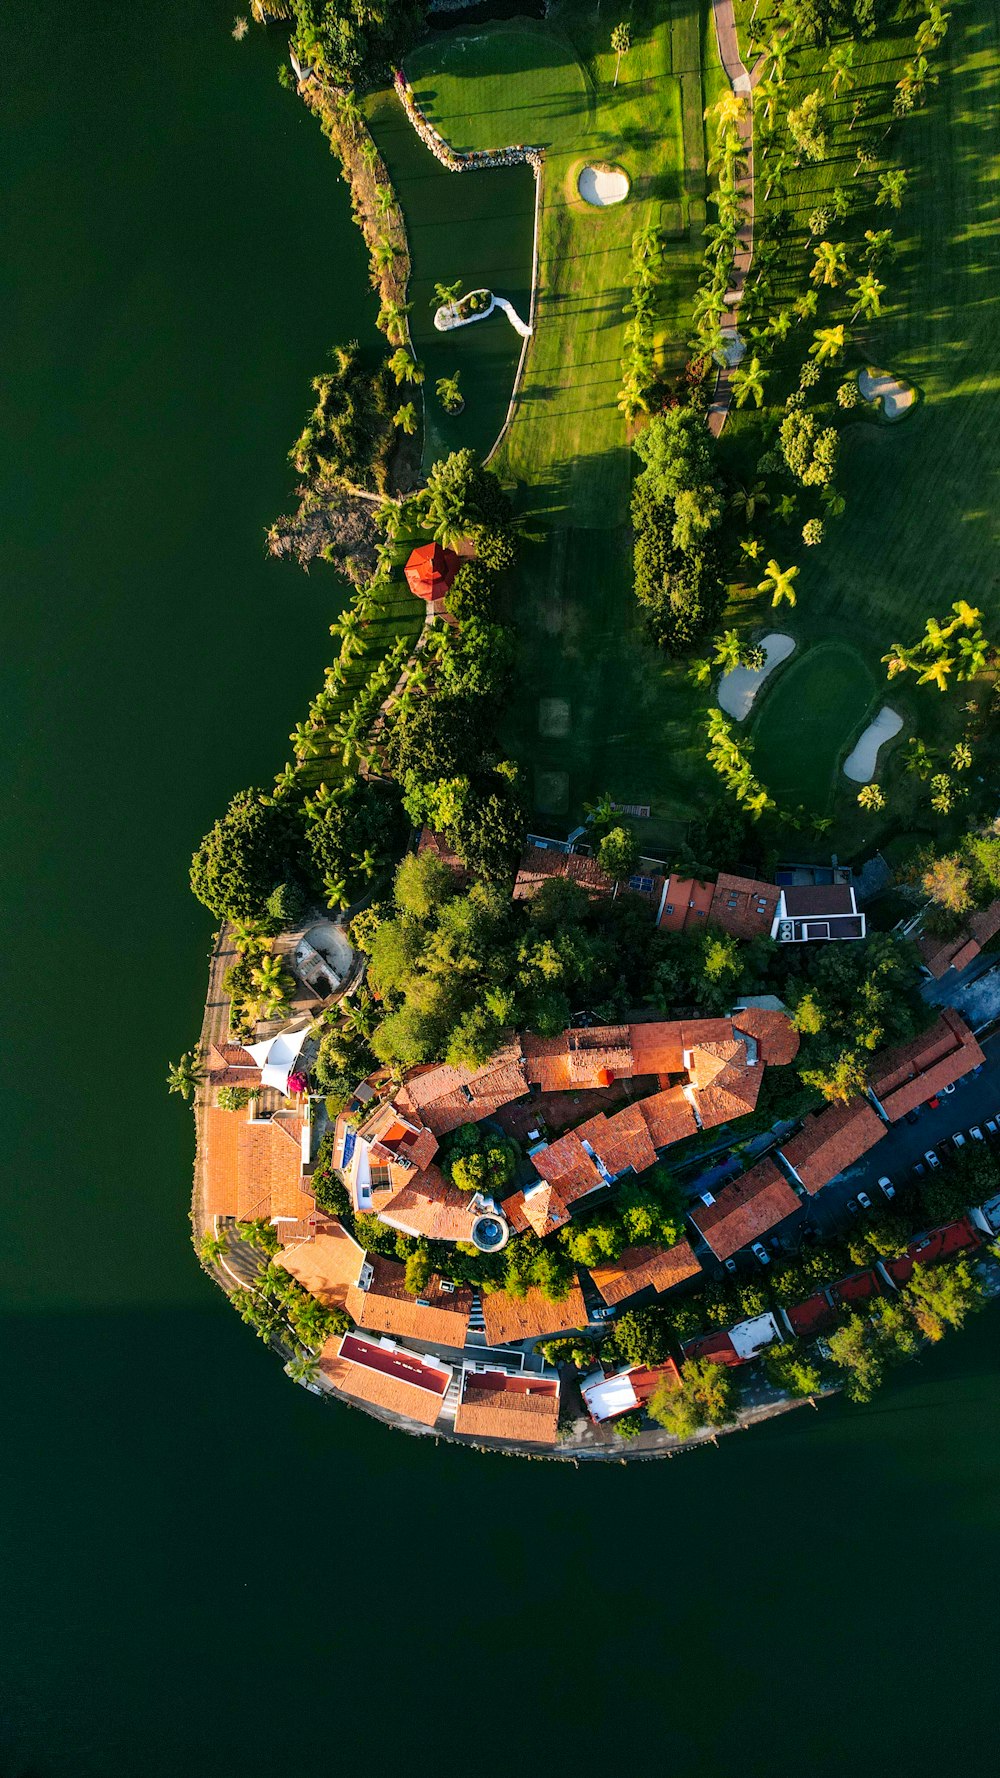 aerial view of houses near green trees and body of water during daytime